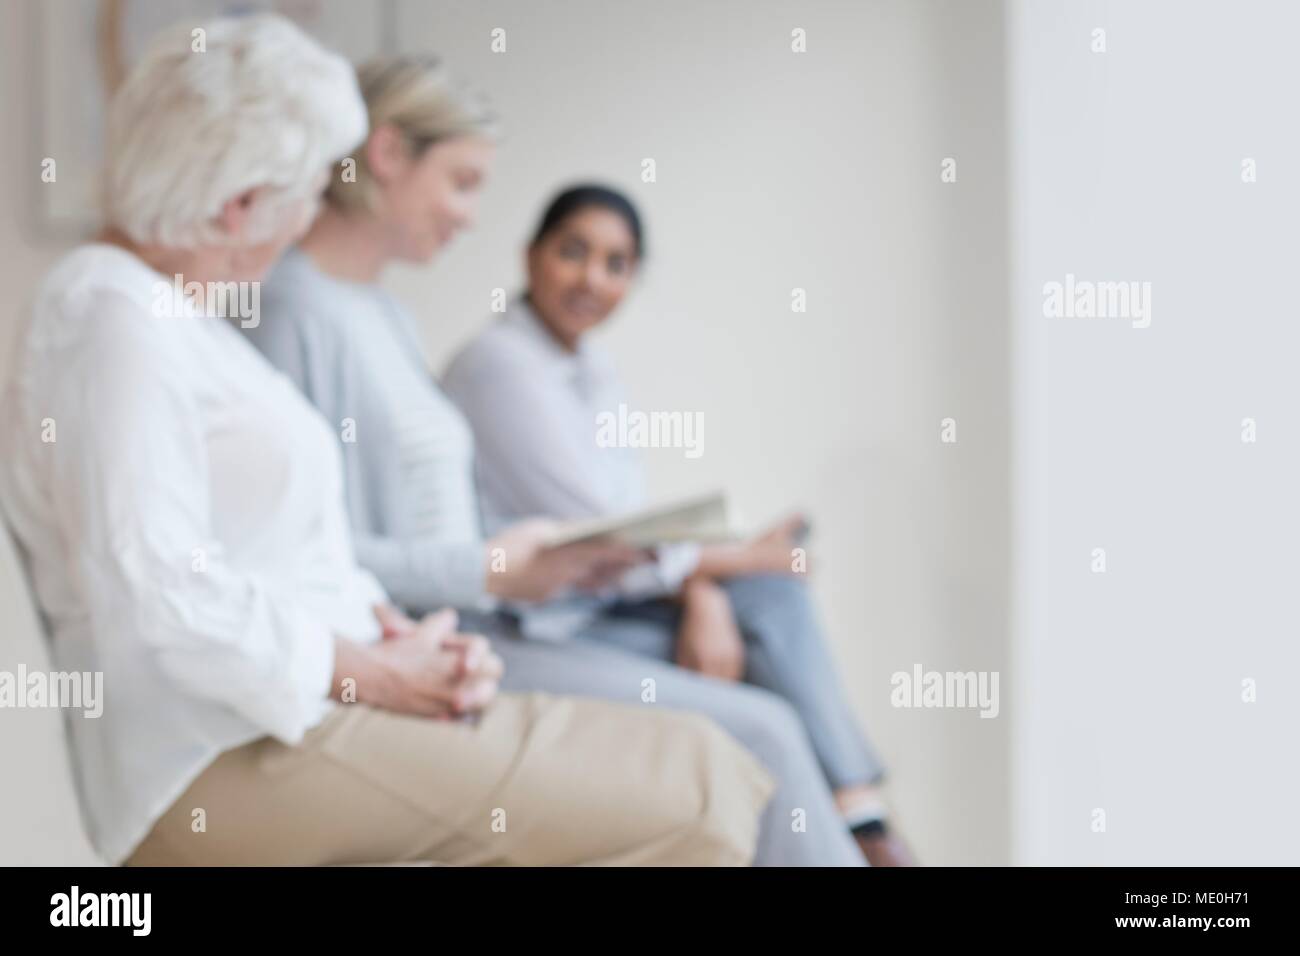 Women sitting in doctor's waiting room. Stock Photo